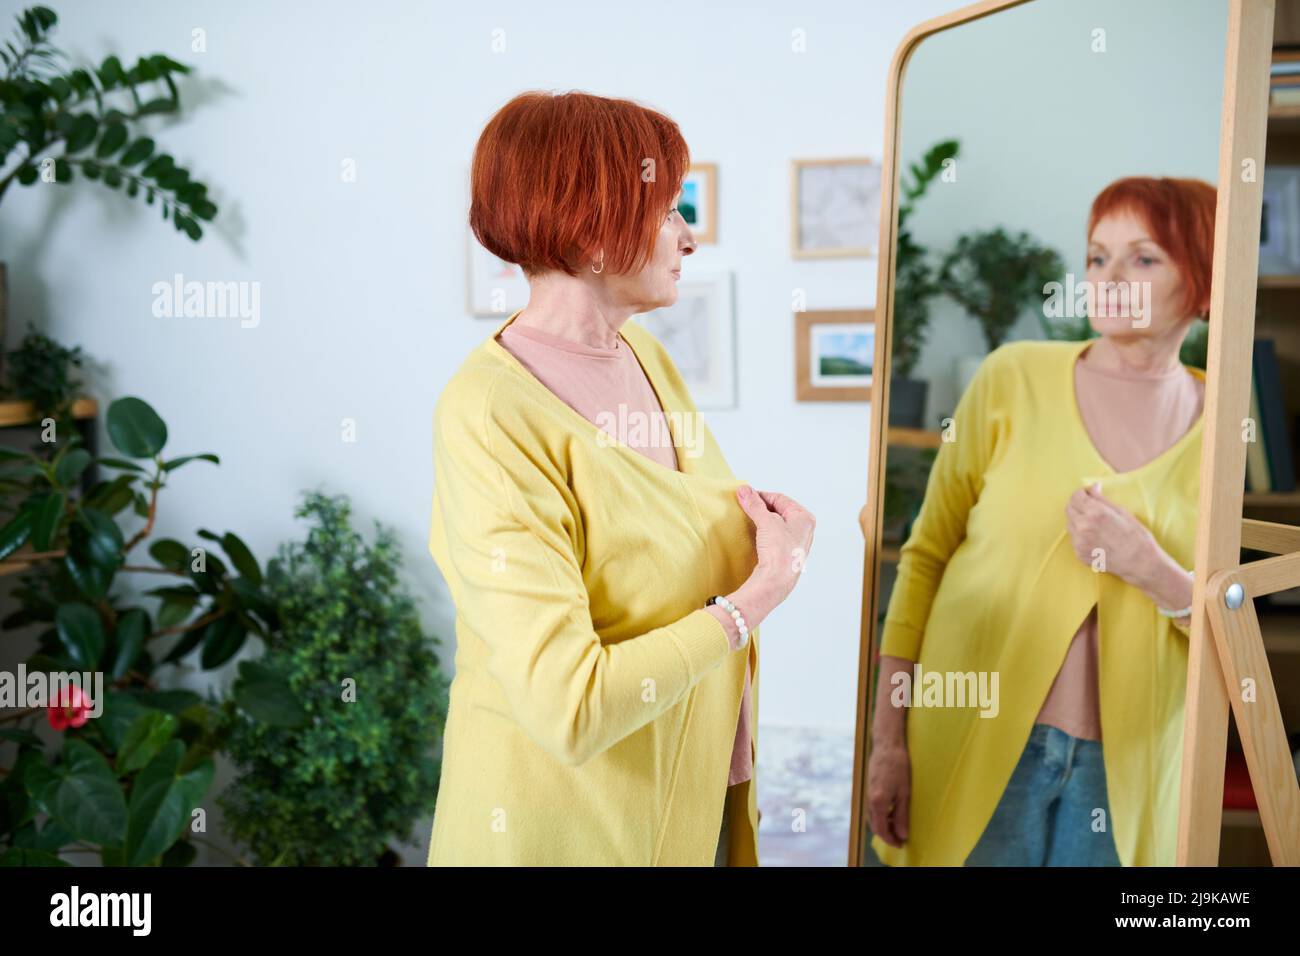 Senior woman with red hair looking at her reflection in mirror while trying on new yellow cardigan Stock Photo